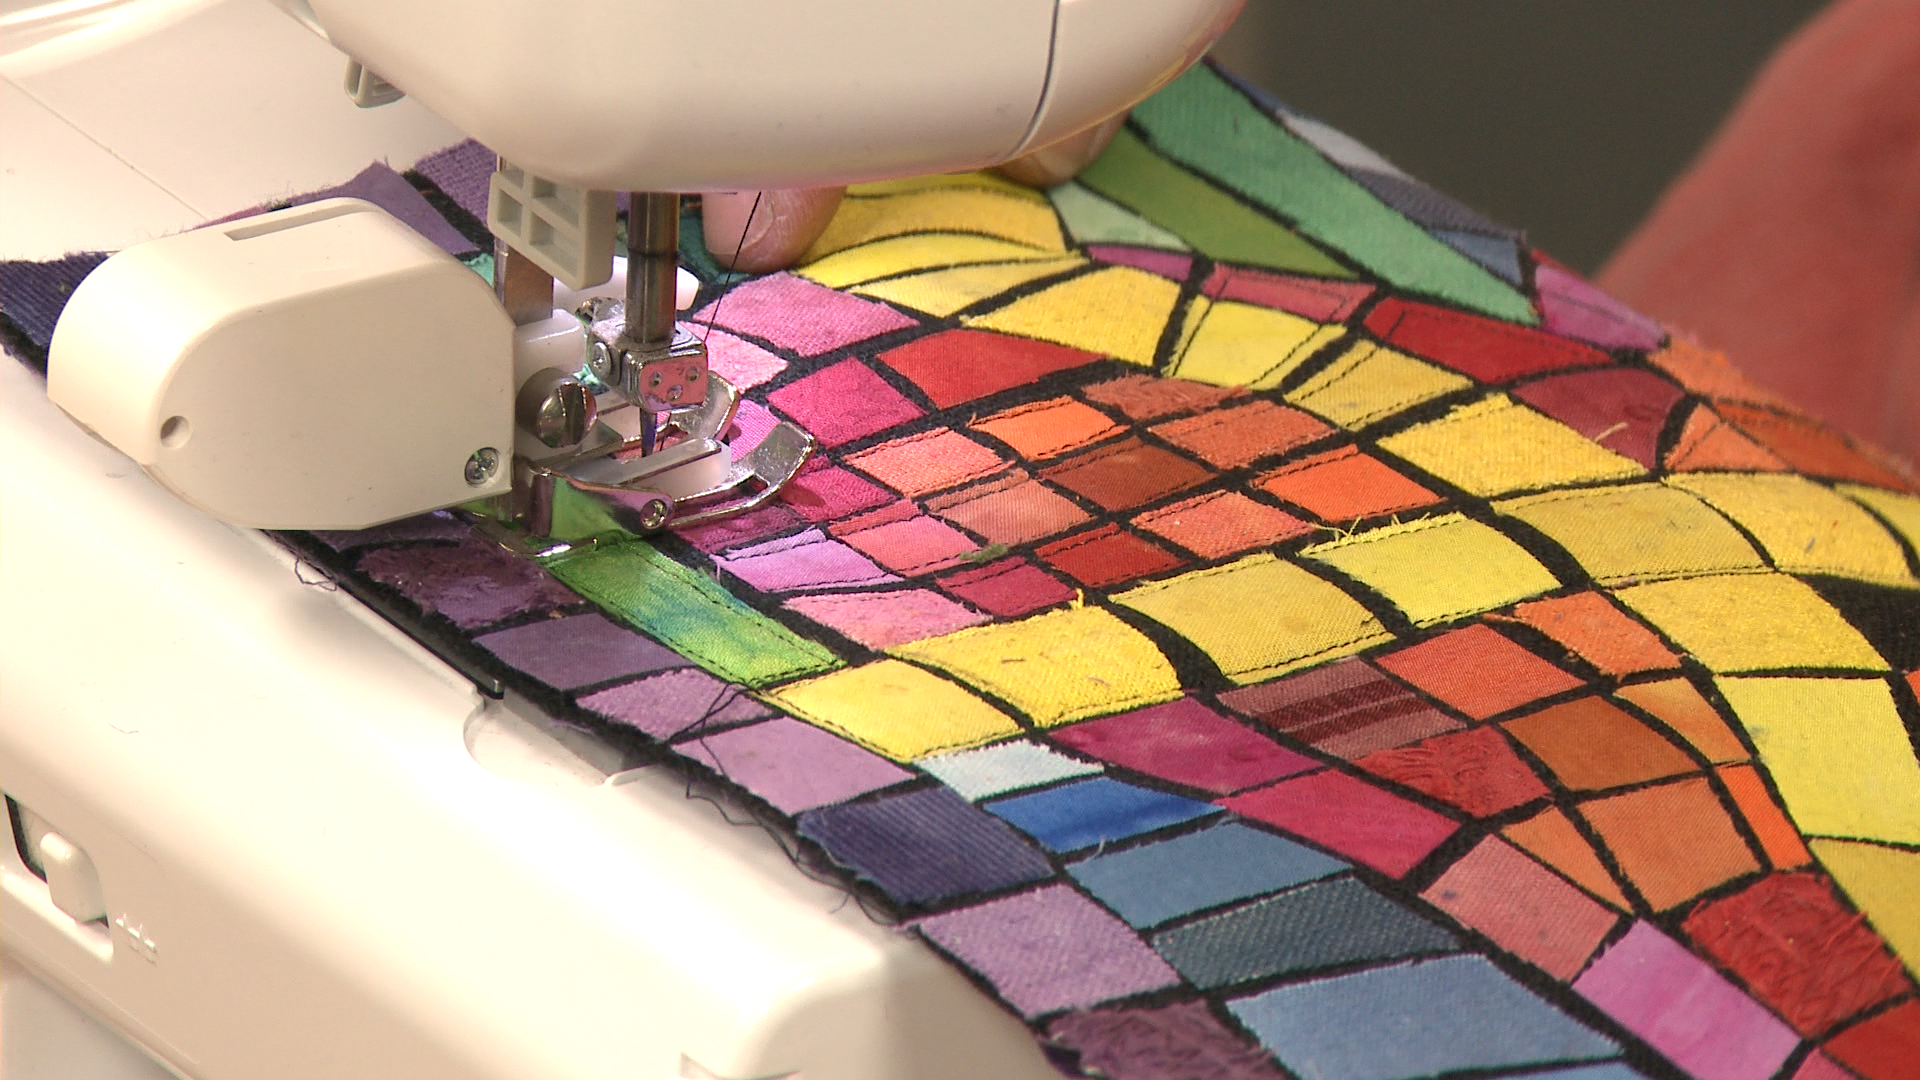 Session 5: Quilting the Mosaic